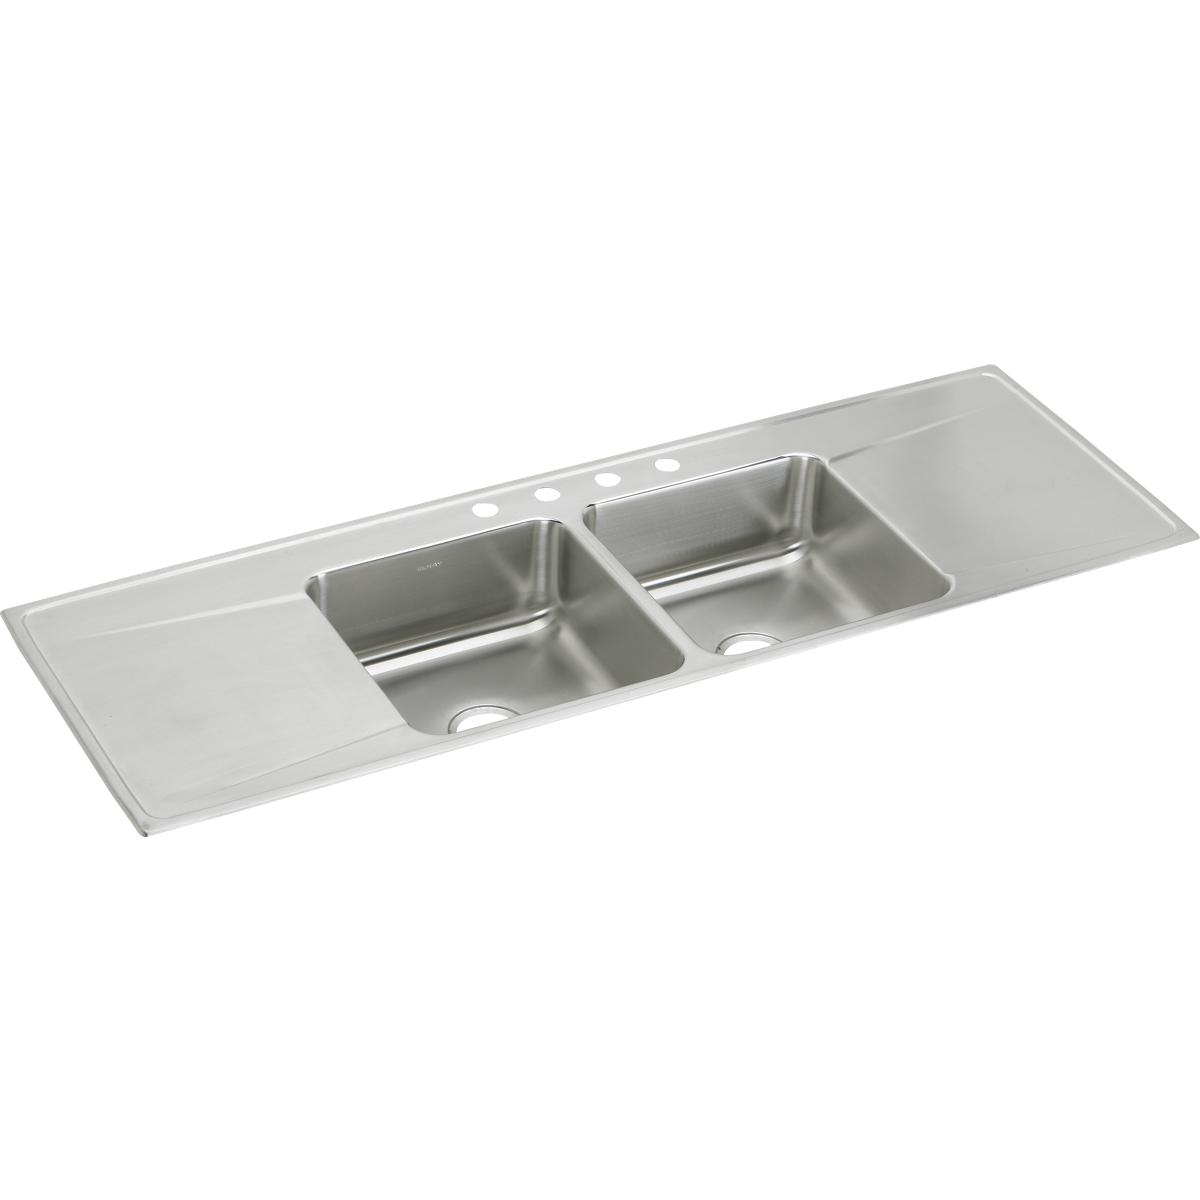 Elkay 66" x 22" x 7-5/8" Lustertone Classic Stainless Steel Equal Double Bowl Drop-in Sink with Drainboard